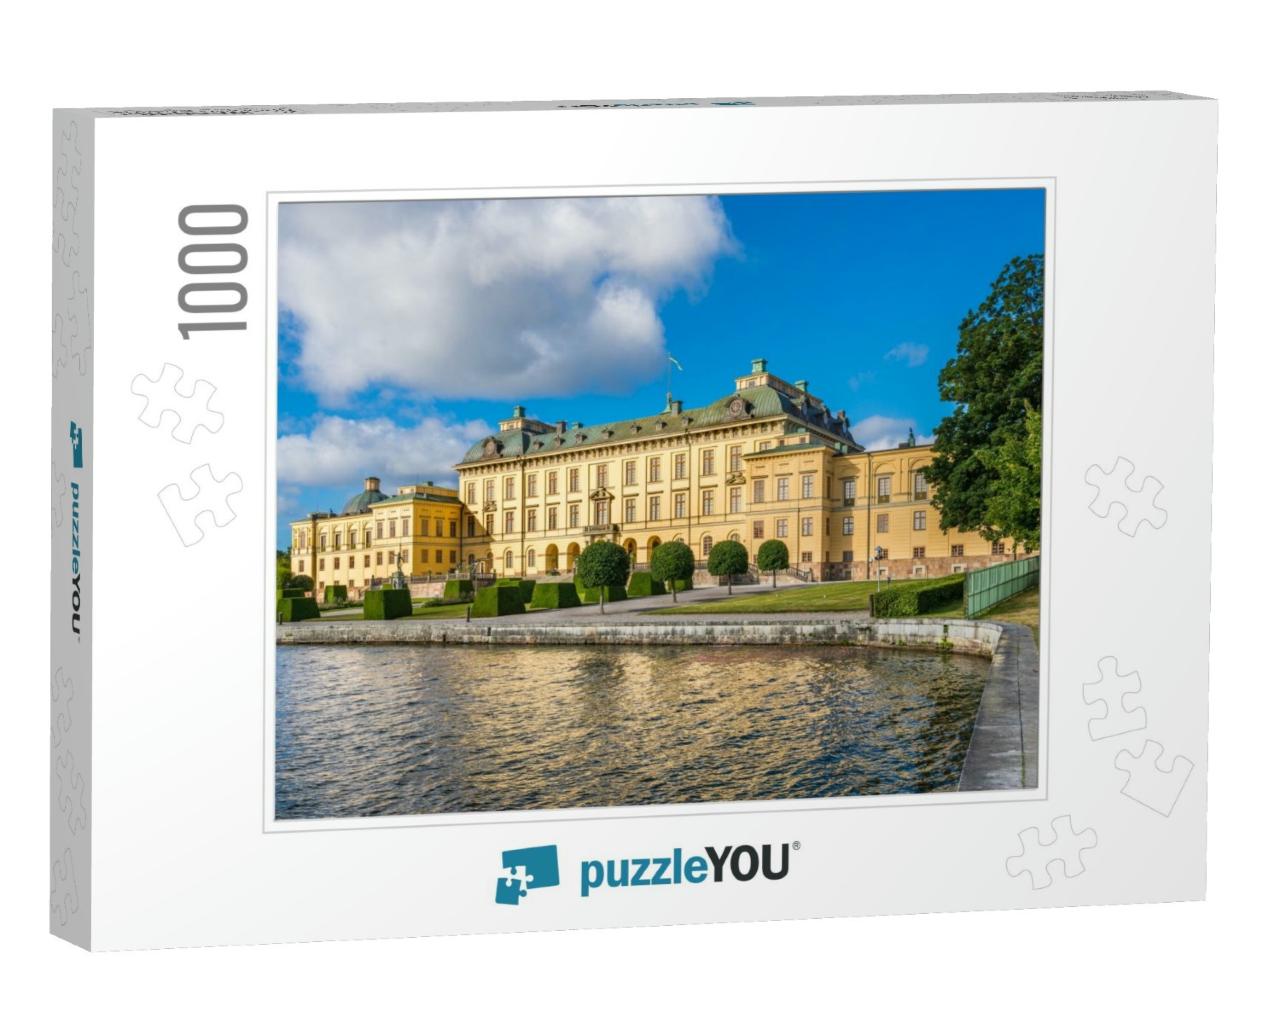 View Over Drottningholm Palace in Stockholm, Sweden... Jigsaw Puzzle with 1000 pieces